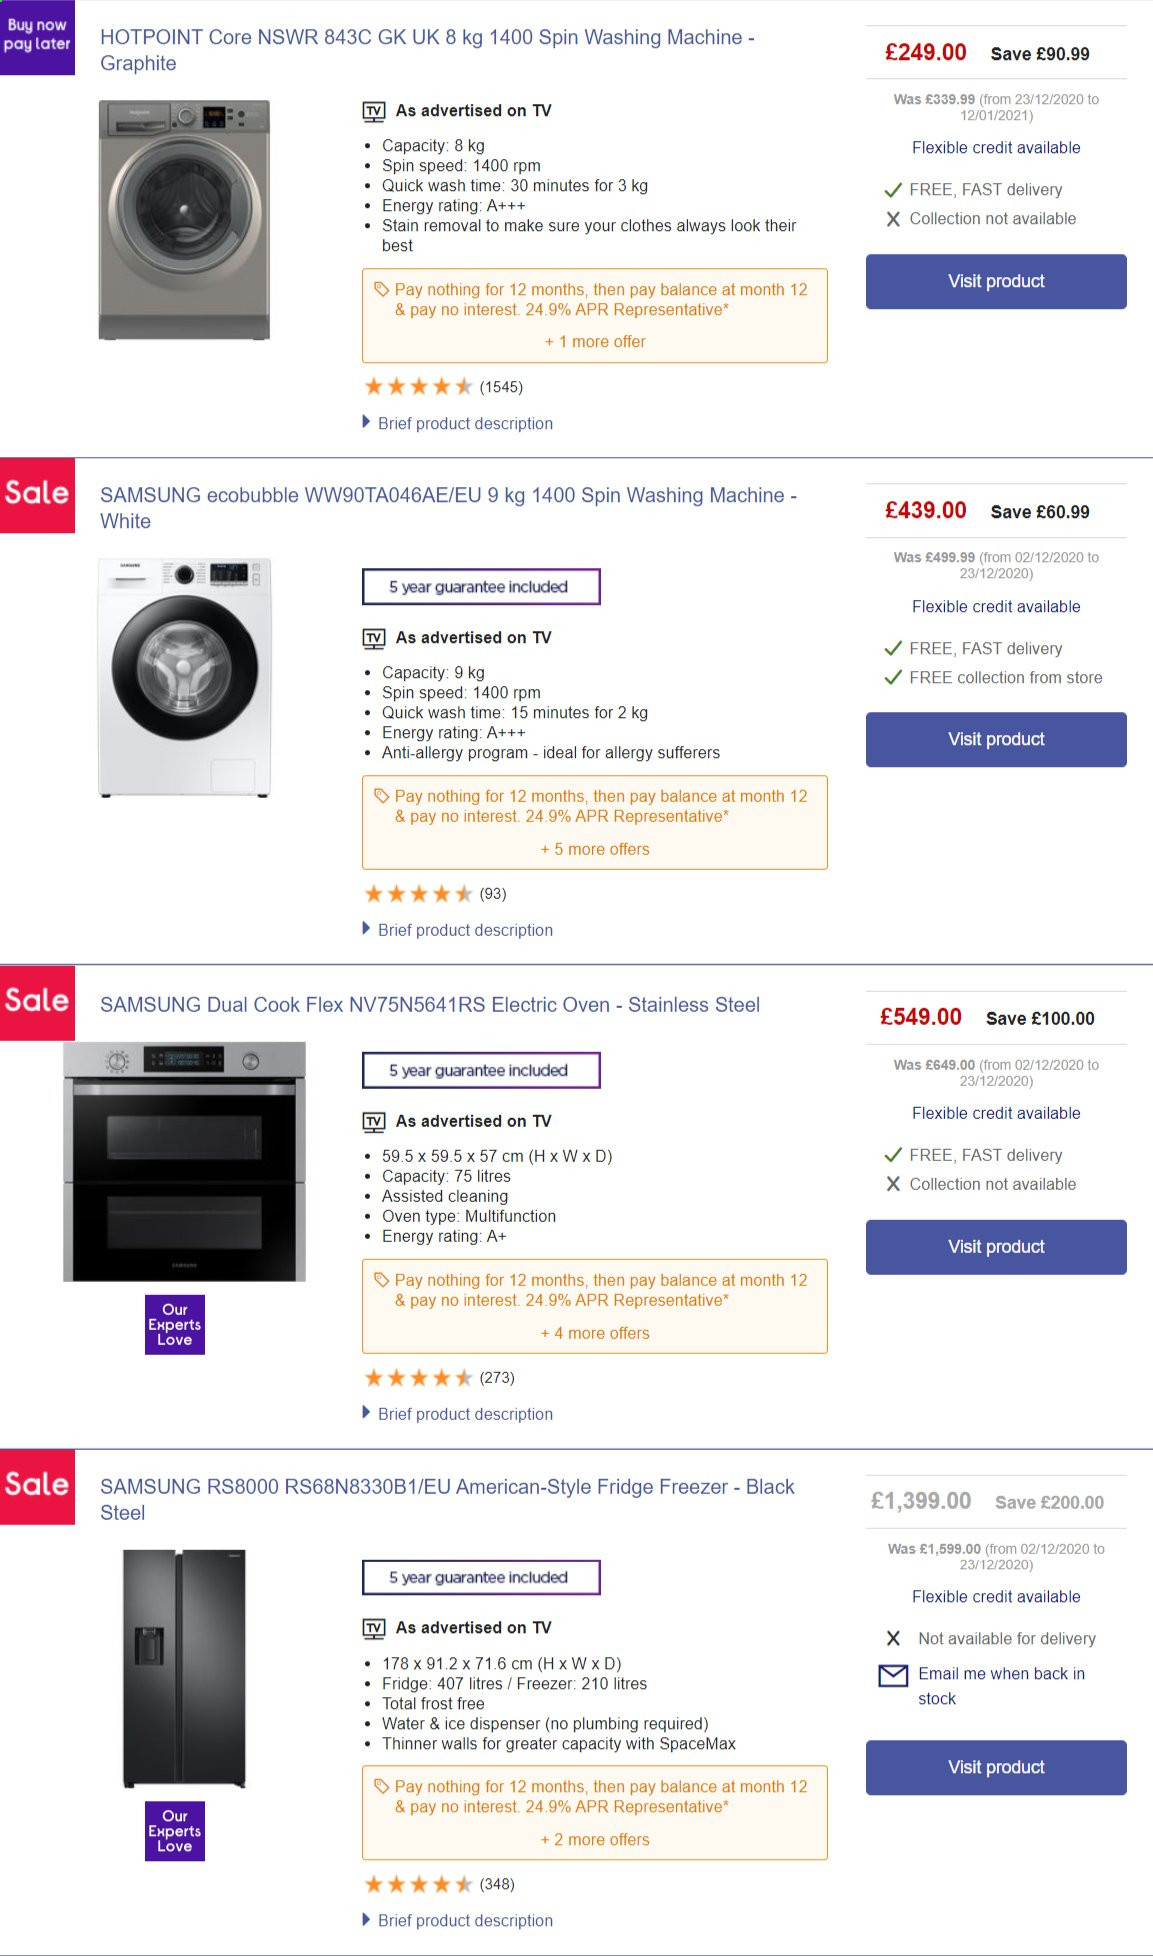 thumbnail - Currys PC World offer  - Sales products - Samsung, TV, freezer, refrigerator, Hotpoint, fridge, oven, washing machine. Page 2.